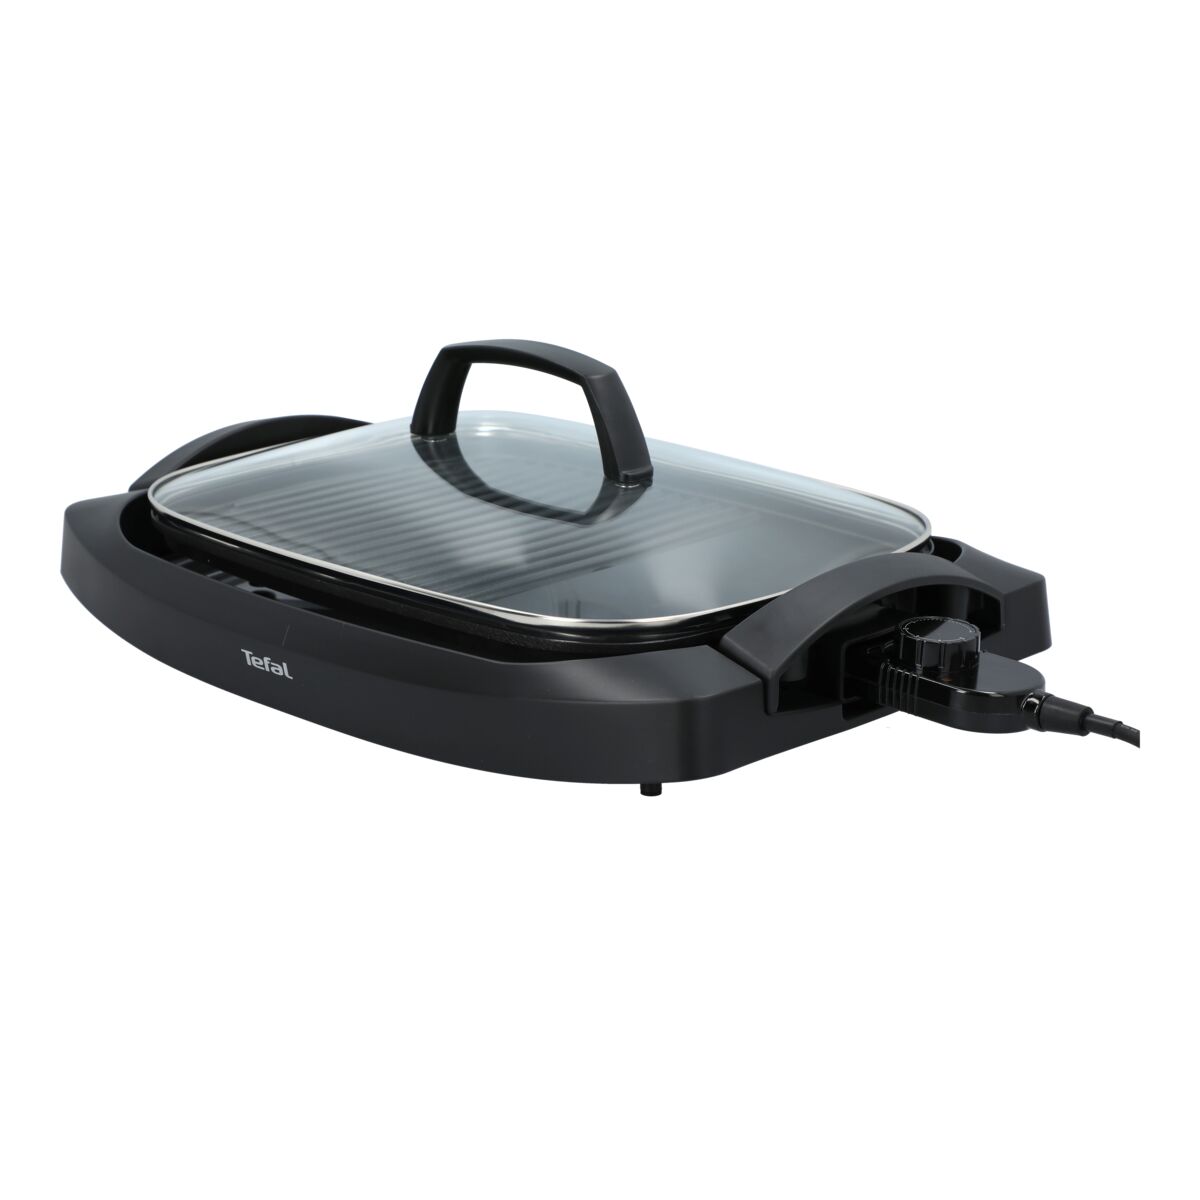 Tefal Table Grill with Lid 2000W (CB6A0827)